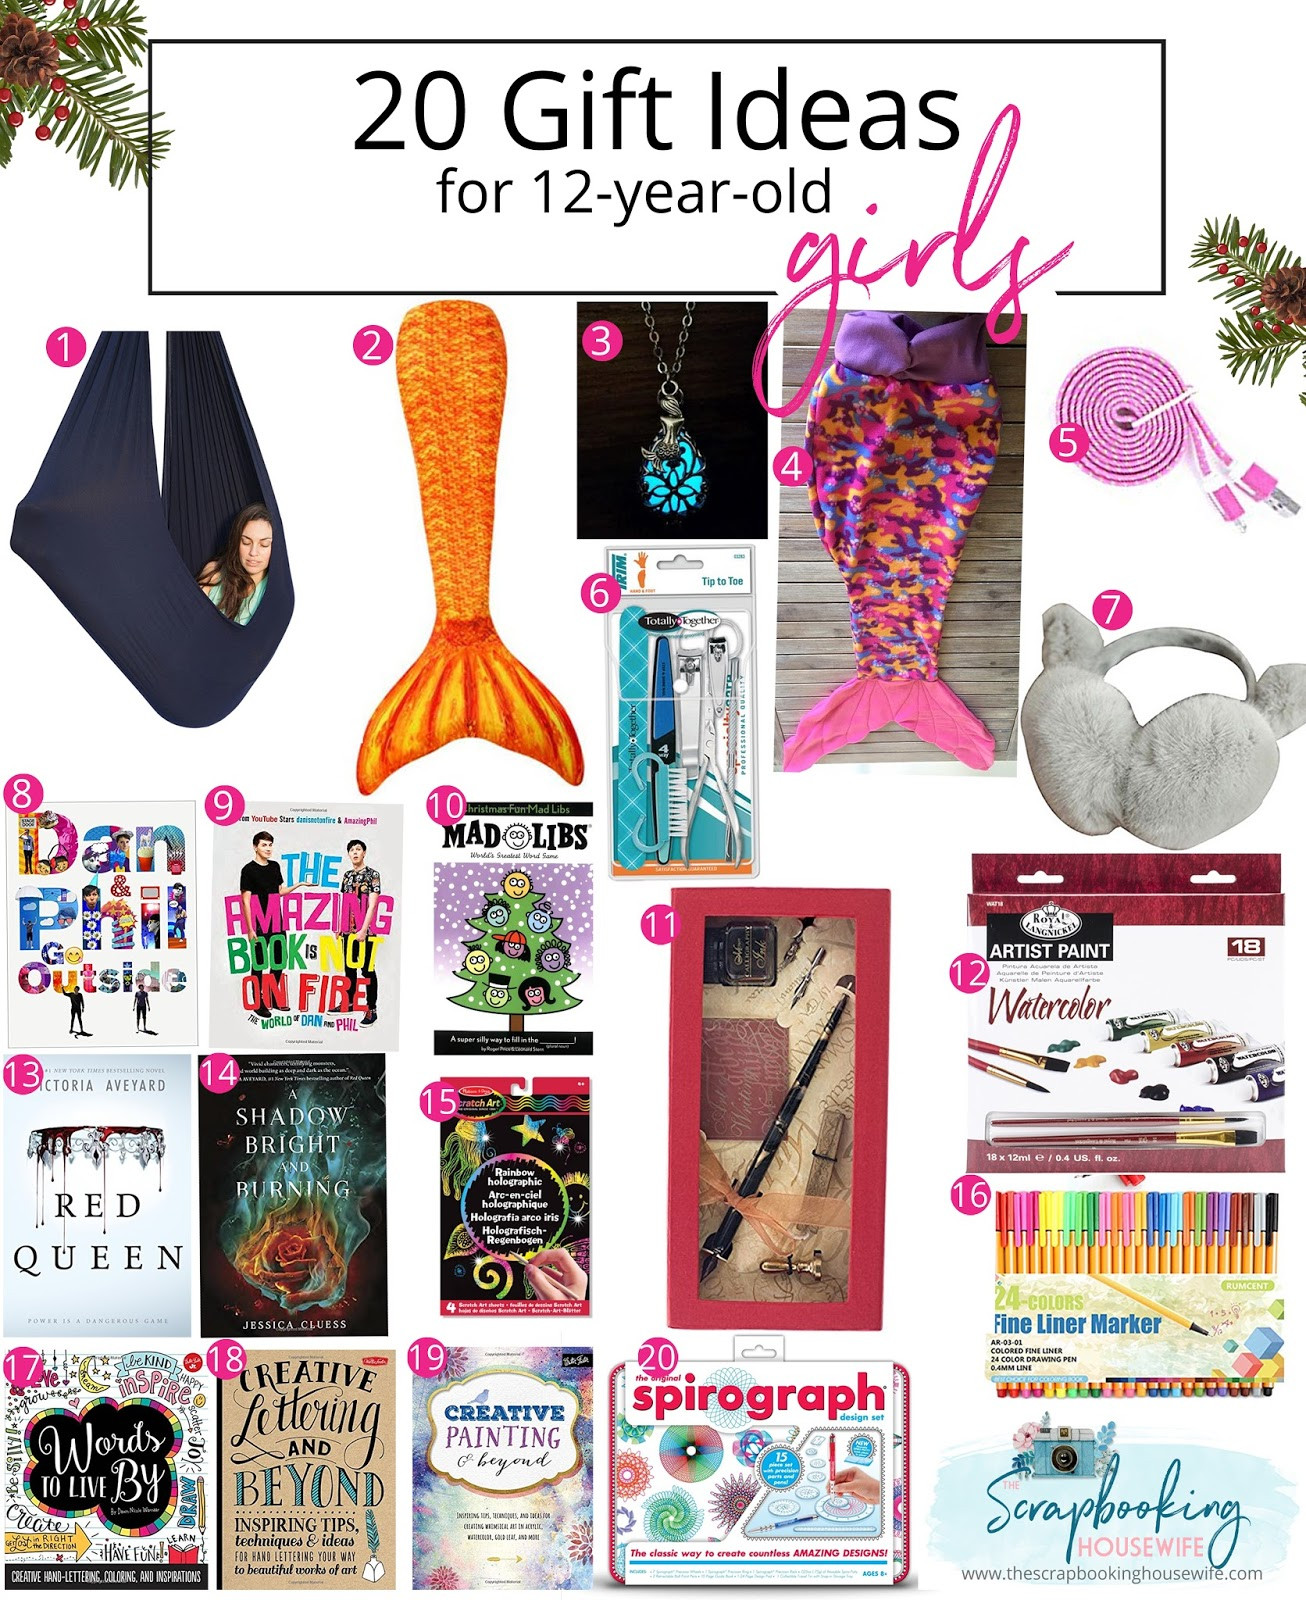 Gift Ideas For 12 Year Old Girls
 Ellabella Designs 13 GIFT IDEAS FOR TODDLERS